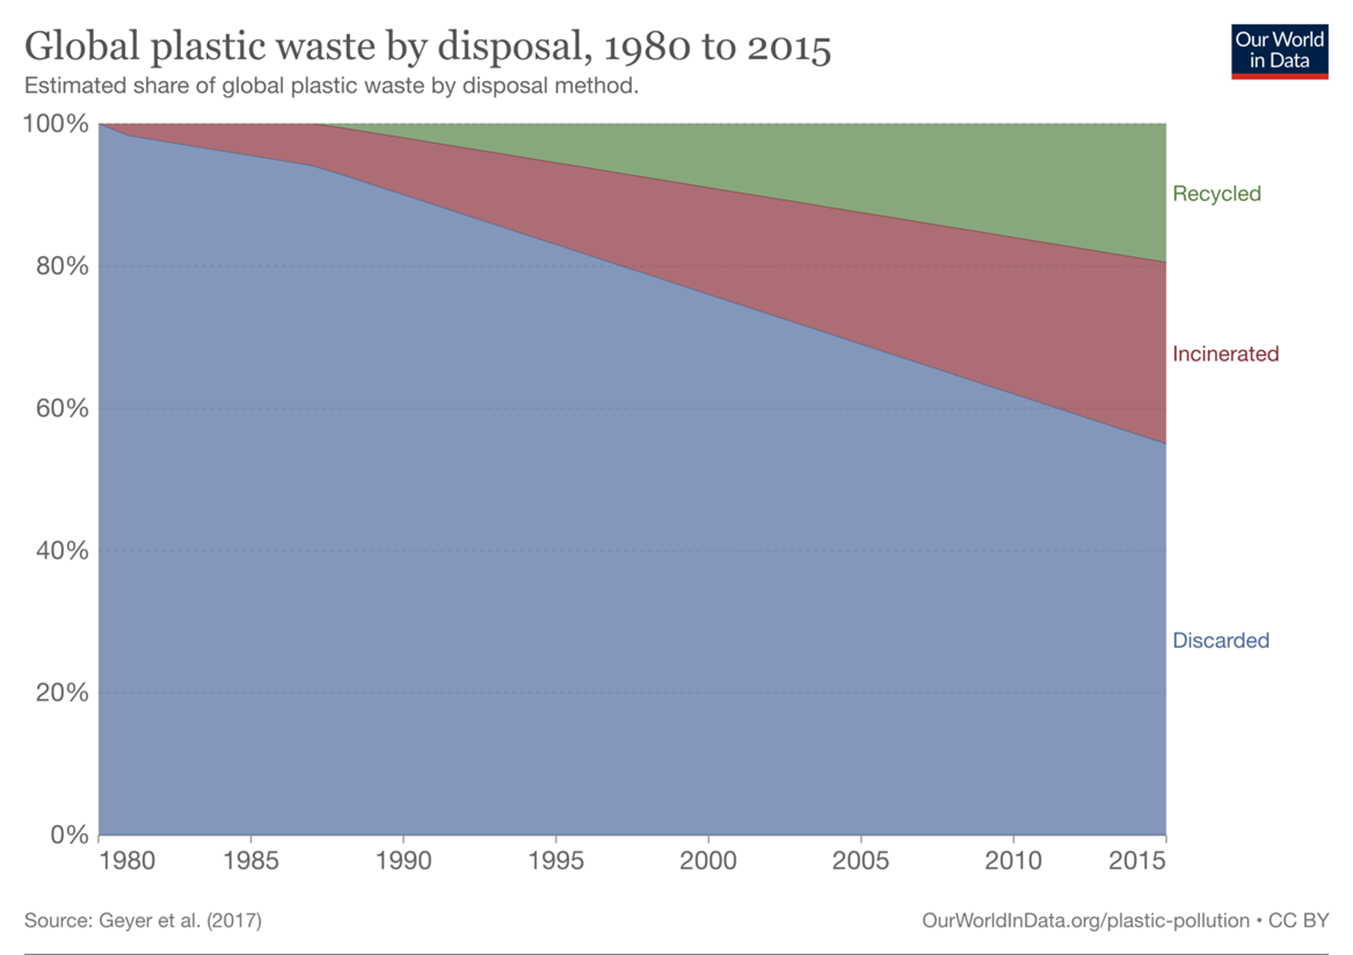 global plastic waste disposal from 1980 to 2015